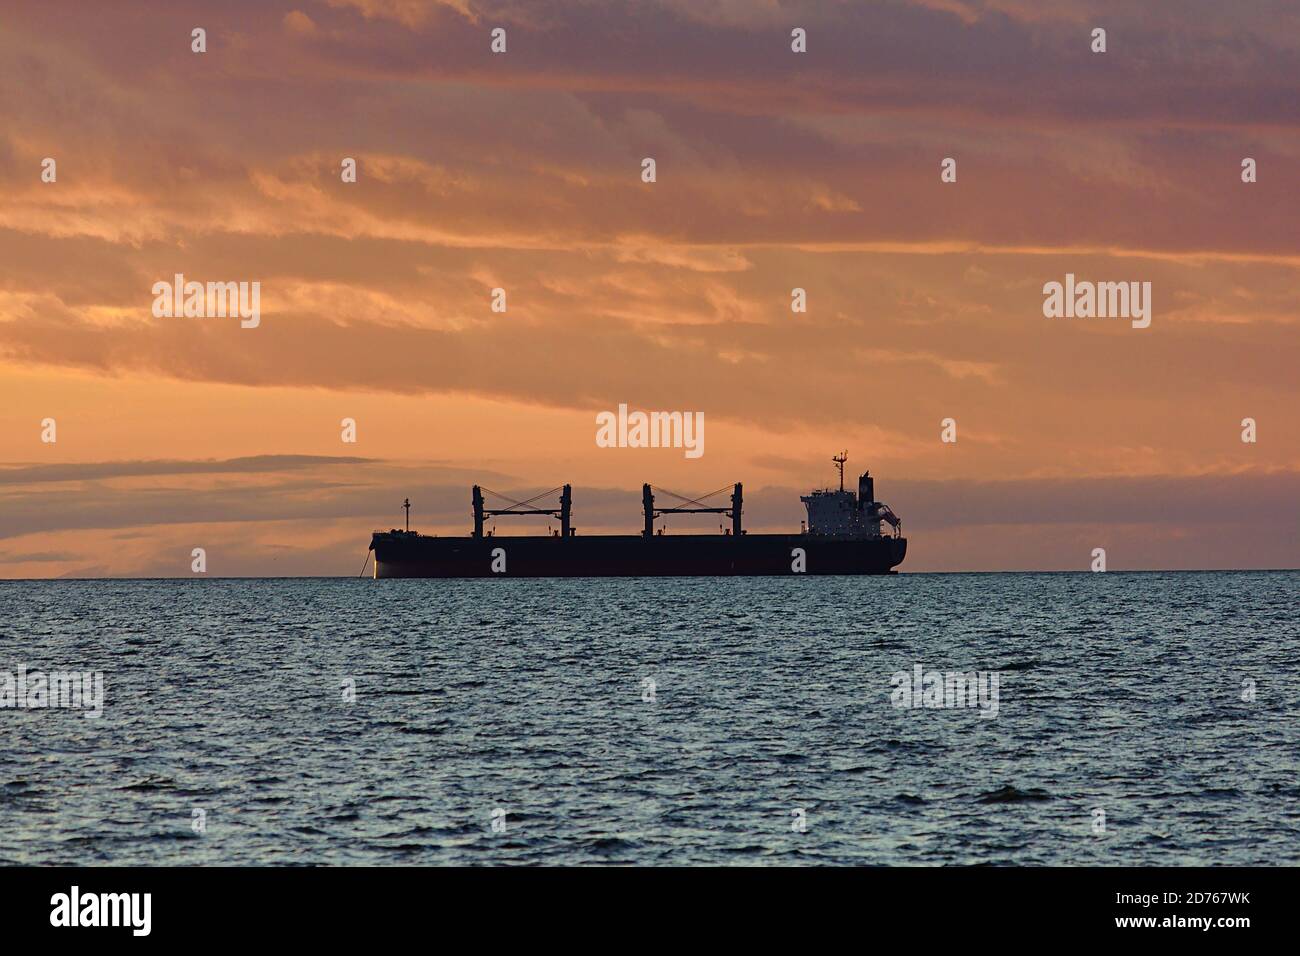 Freight ship silhouette at sunset, horizon view, open ocean. Vancouver, British Columbia, Canada Stock Photo